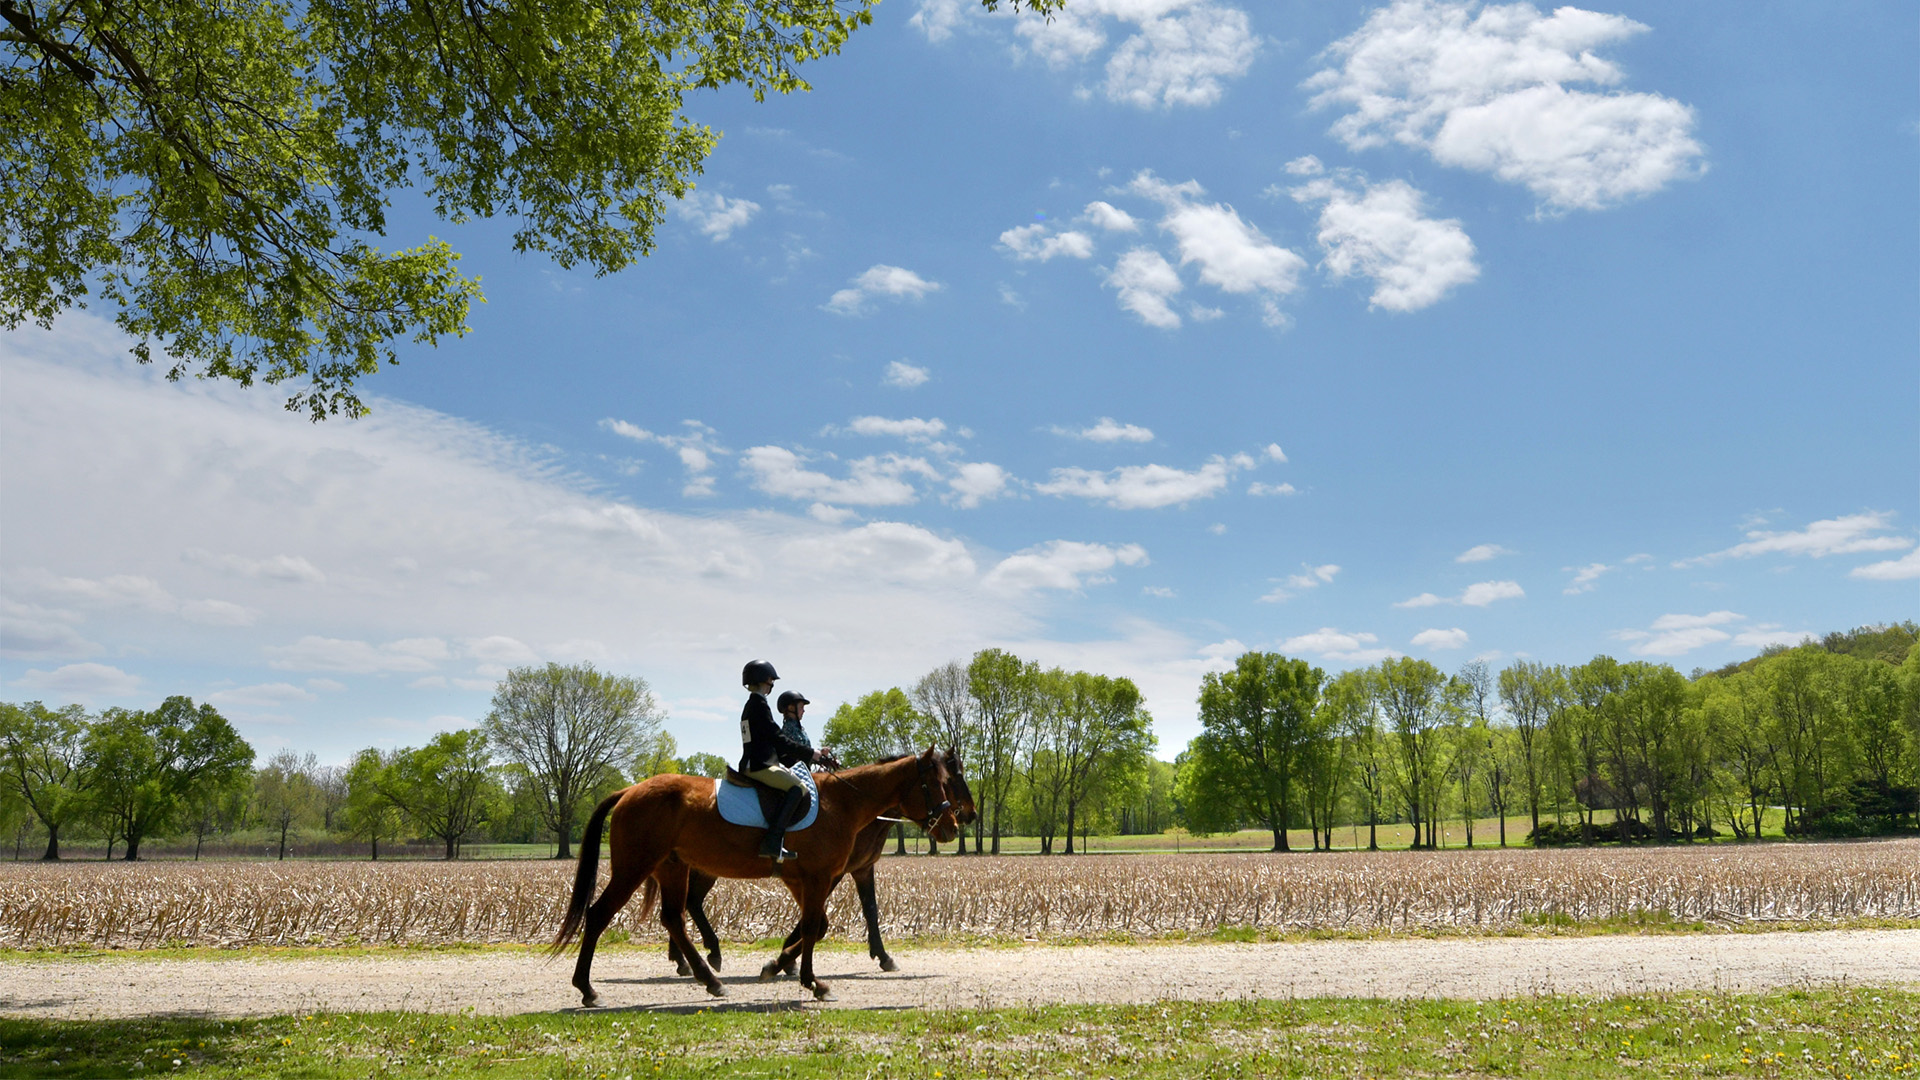 Riders warm up before a riding competition at the Heart of Illinois Horse Arena